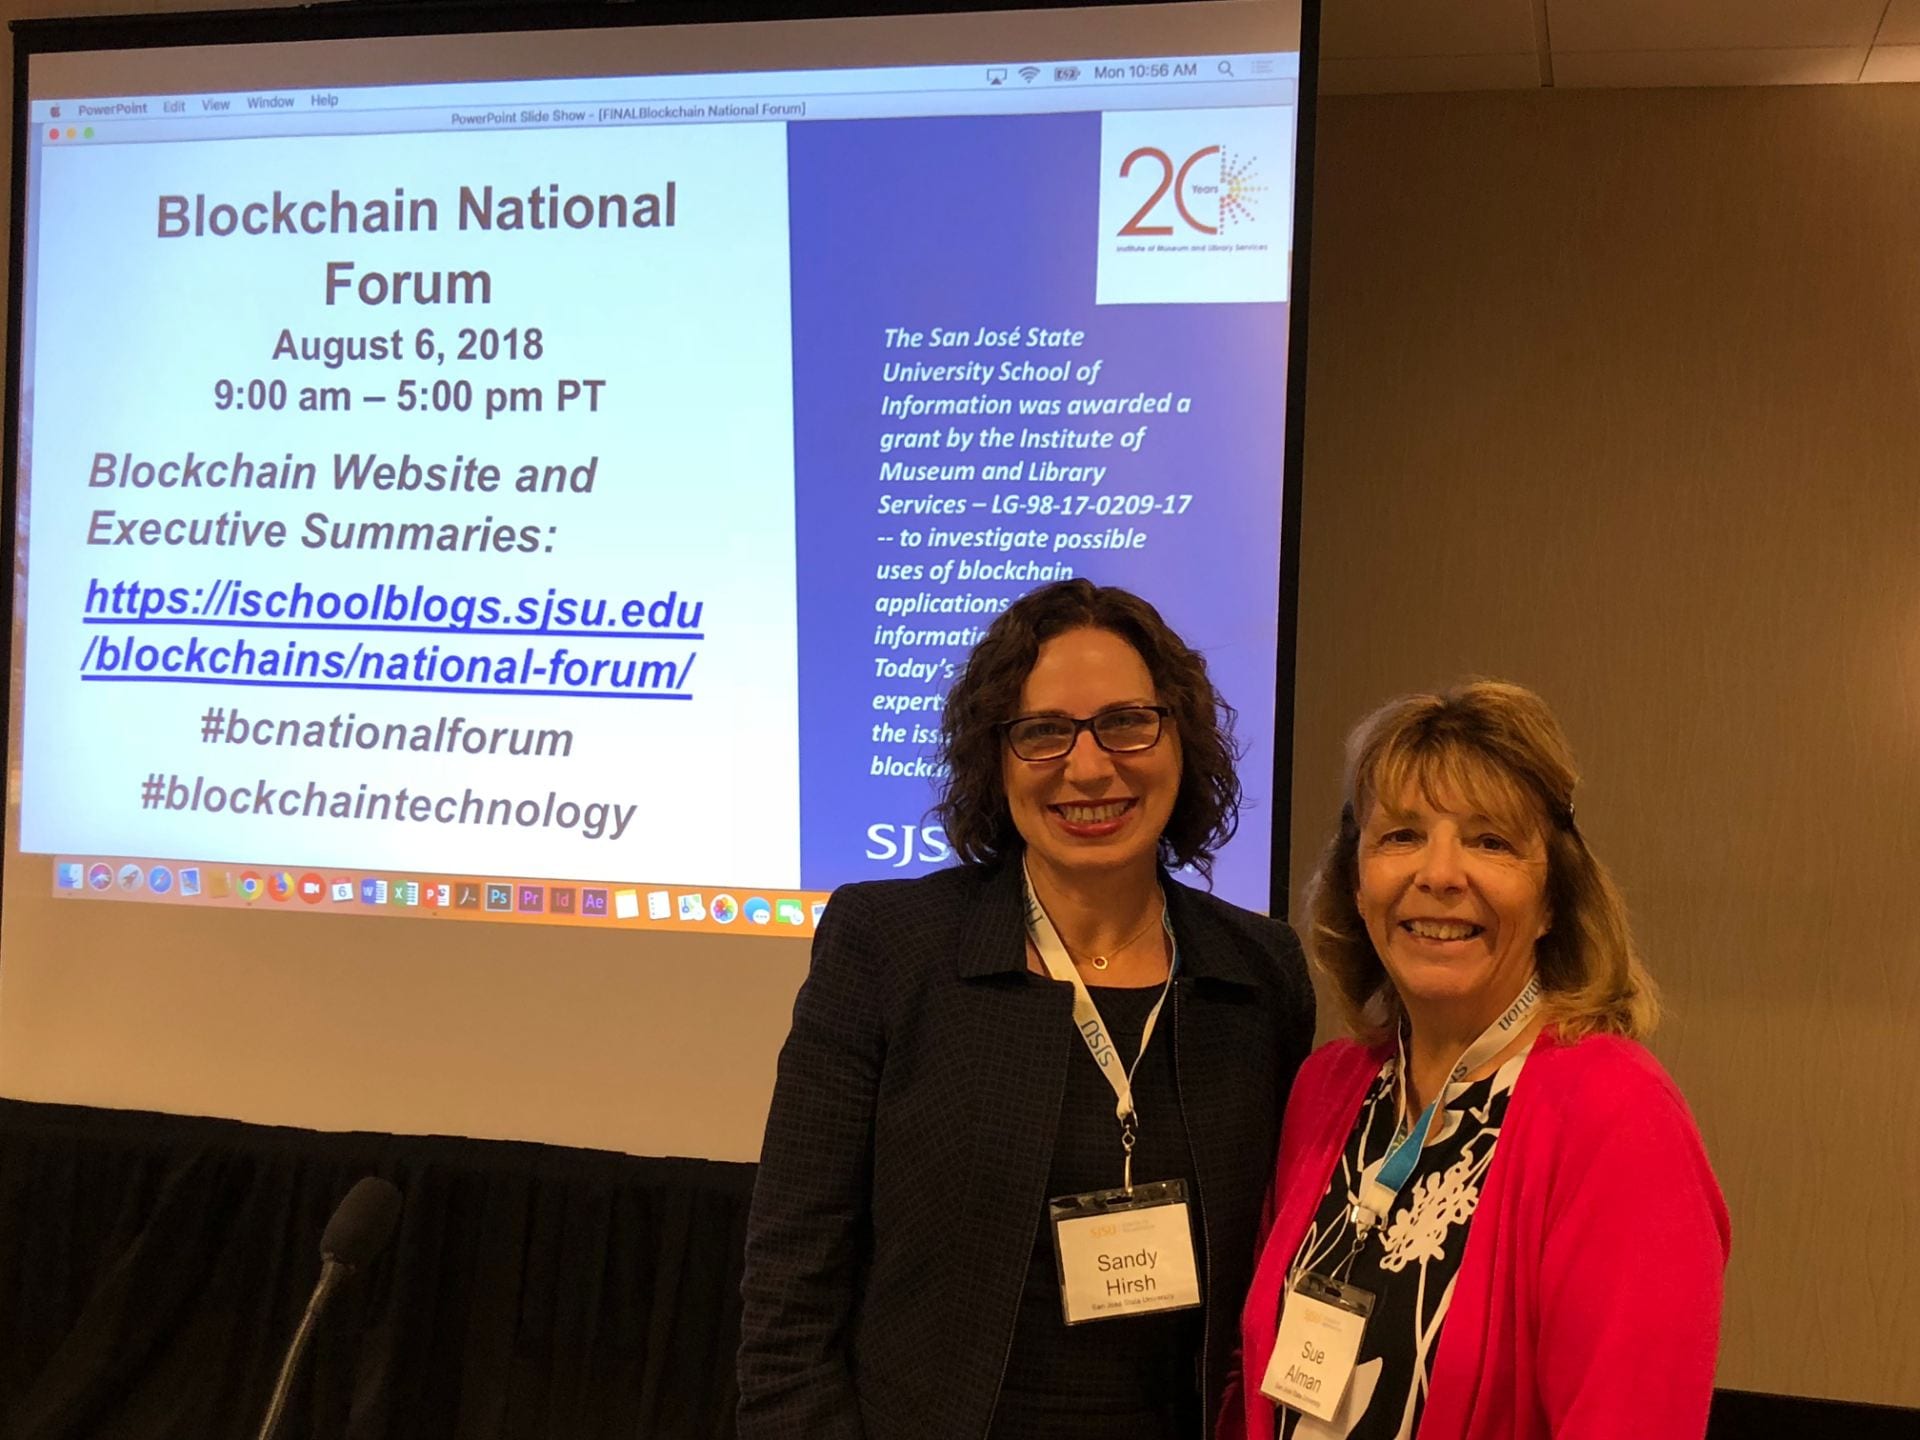 Dr. Sandy Hirsh, left, and Dr. Sue Alman, presented their research at the National Blockchain Forum in August 2018.